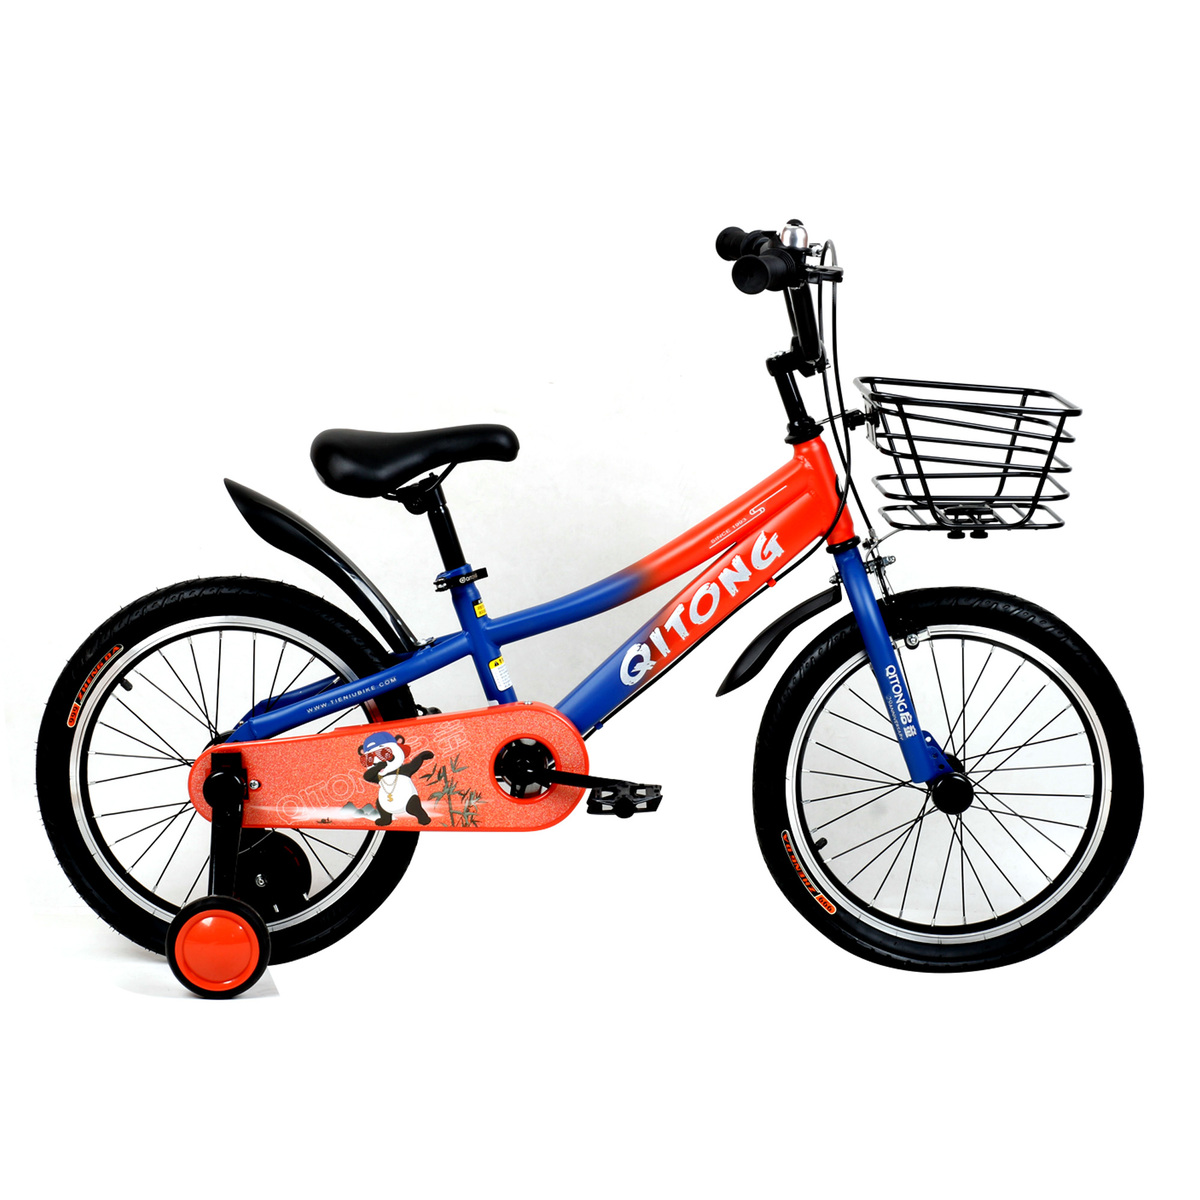 Skid Fusion Kids Bicycle 18inch TN22A05-18